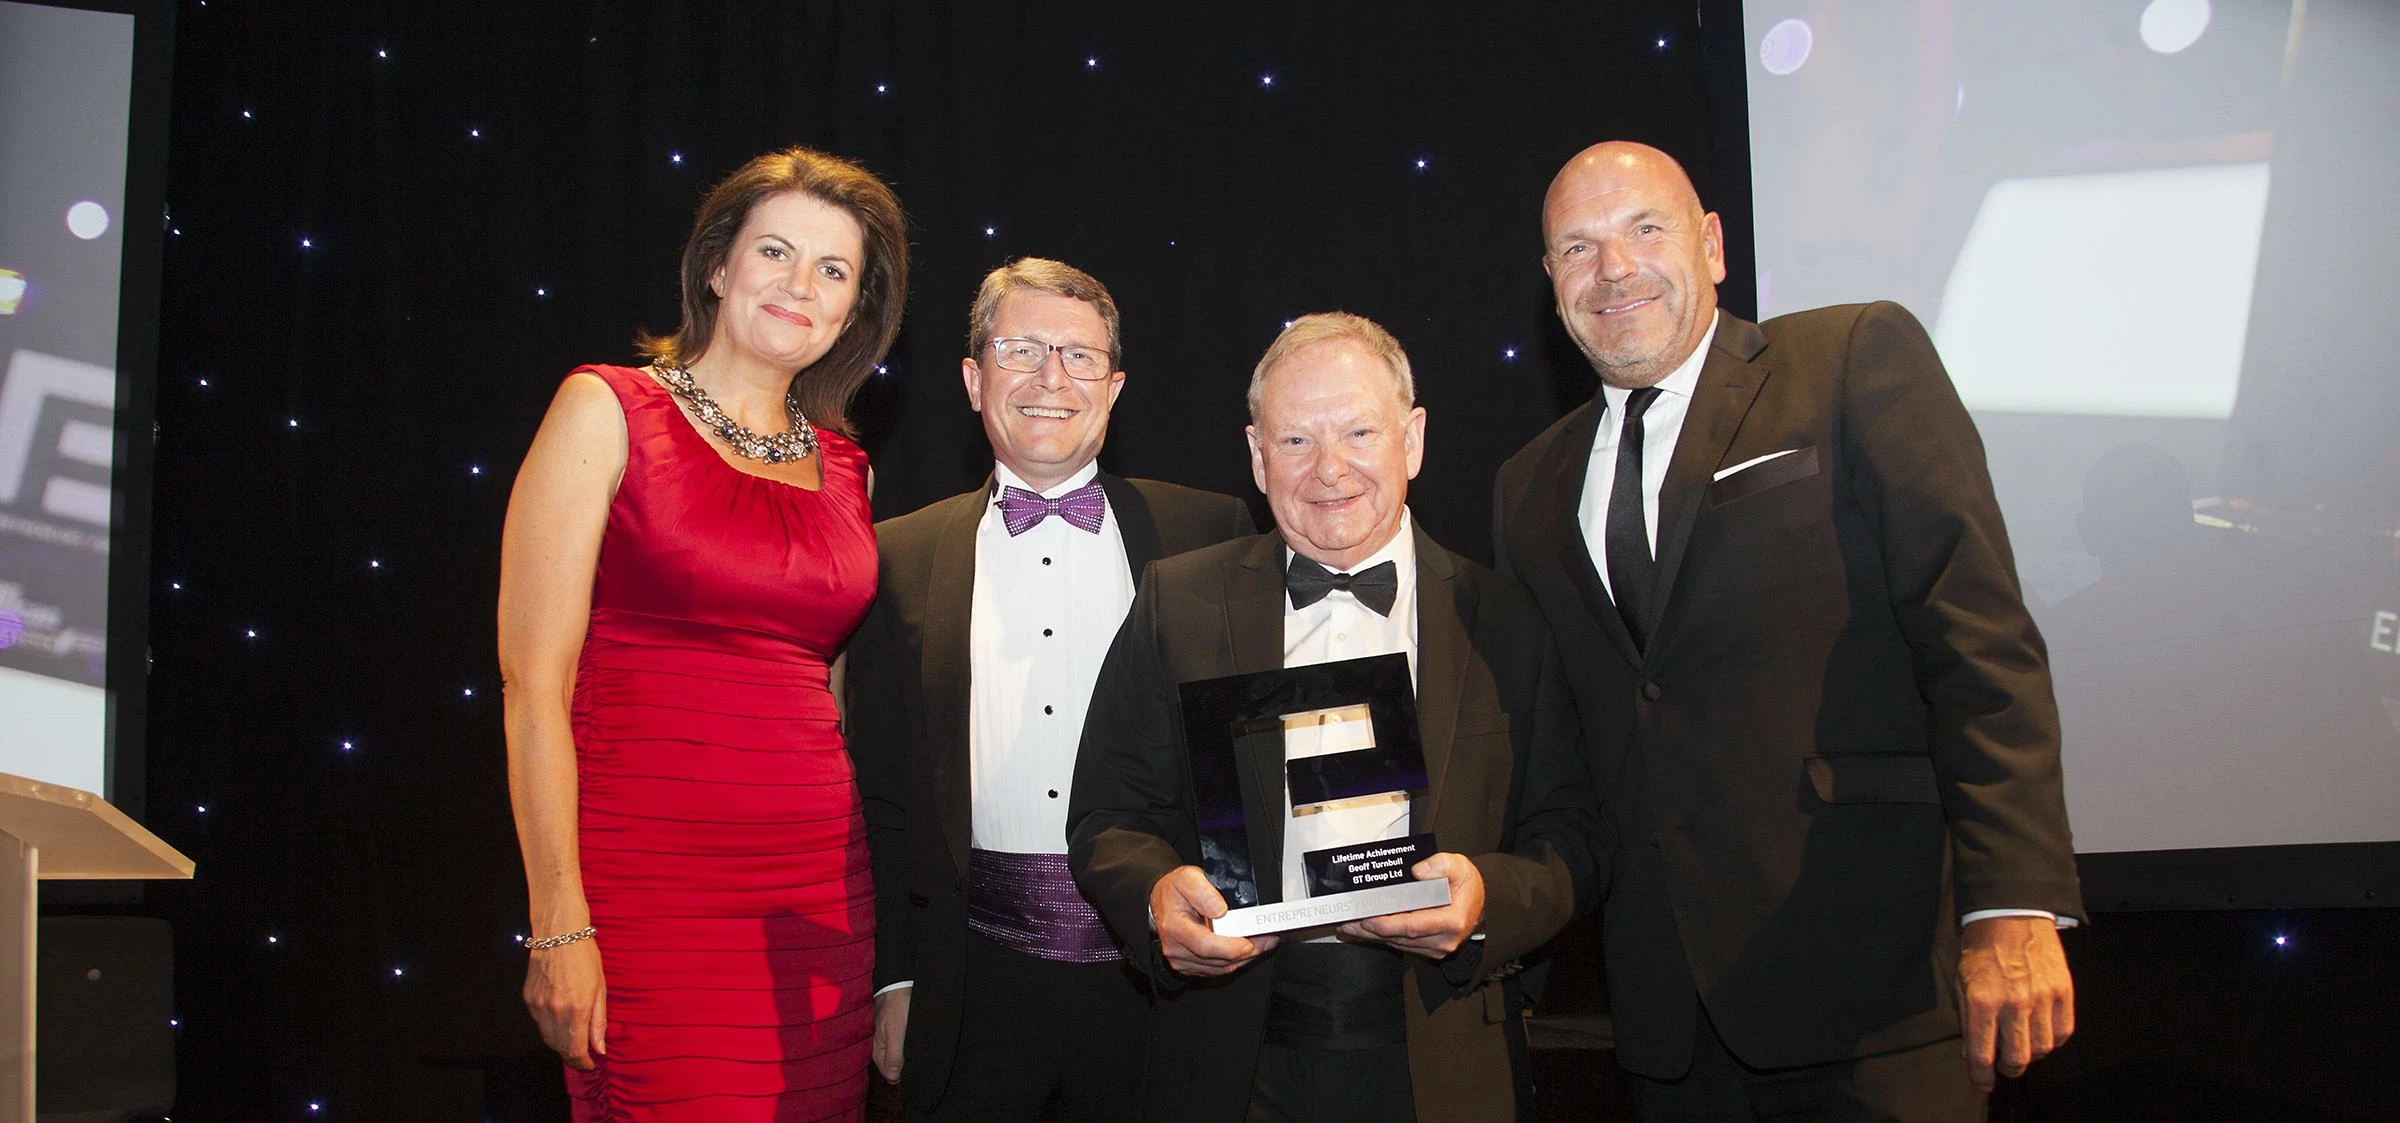 Winner of the Lifetime Achievement award, Geoff Turnbull (third left) with event host Julia Hartley-